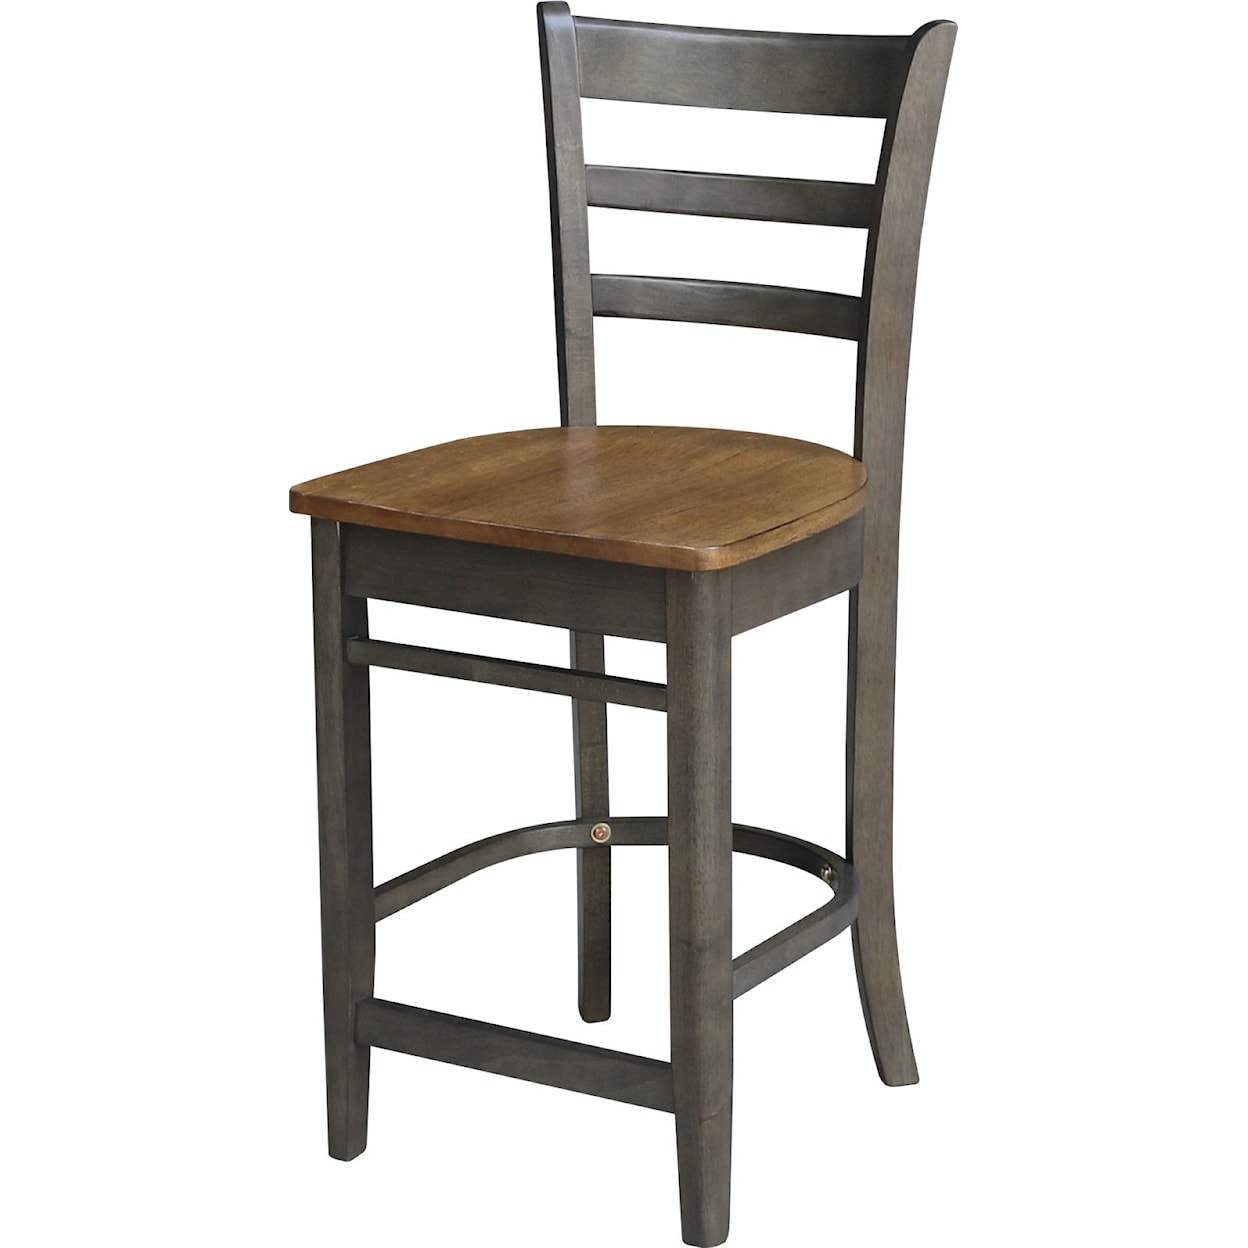 John Thomas Dining Essentials Emily Chair in Hickory / Coal